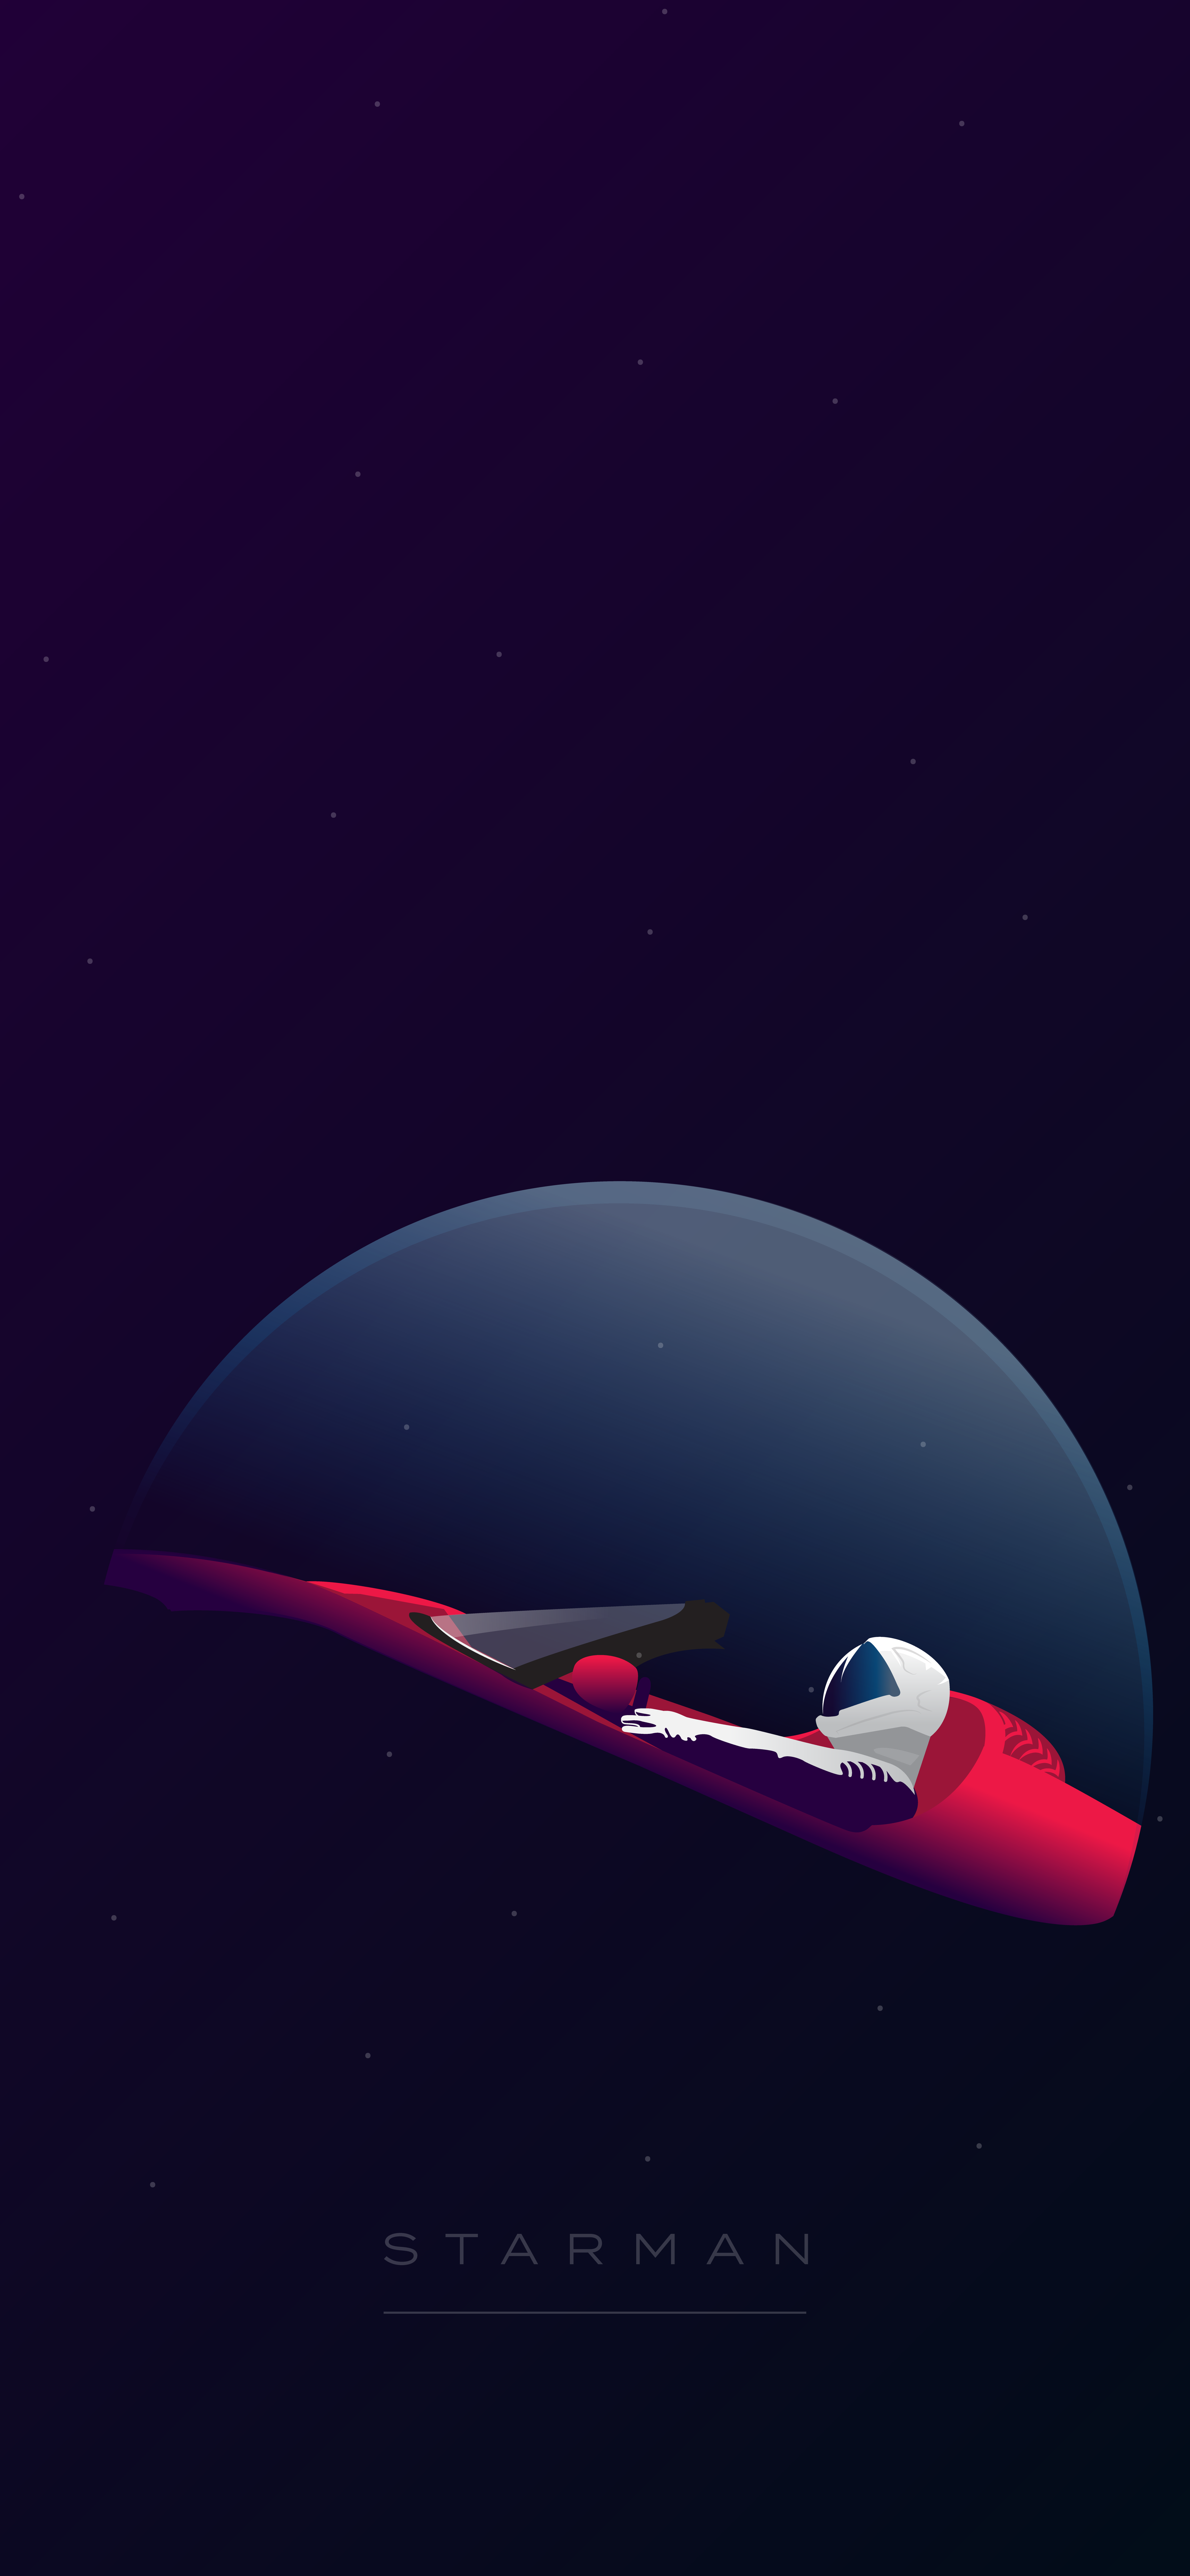 SpaceX Starman Wallpaper Inspired From Falcon Heavy's Tesla Launch